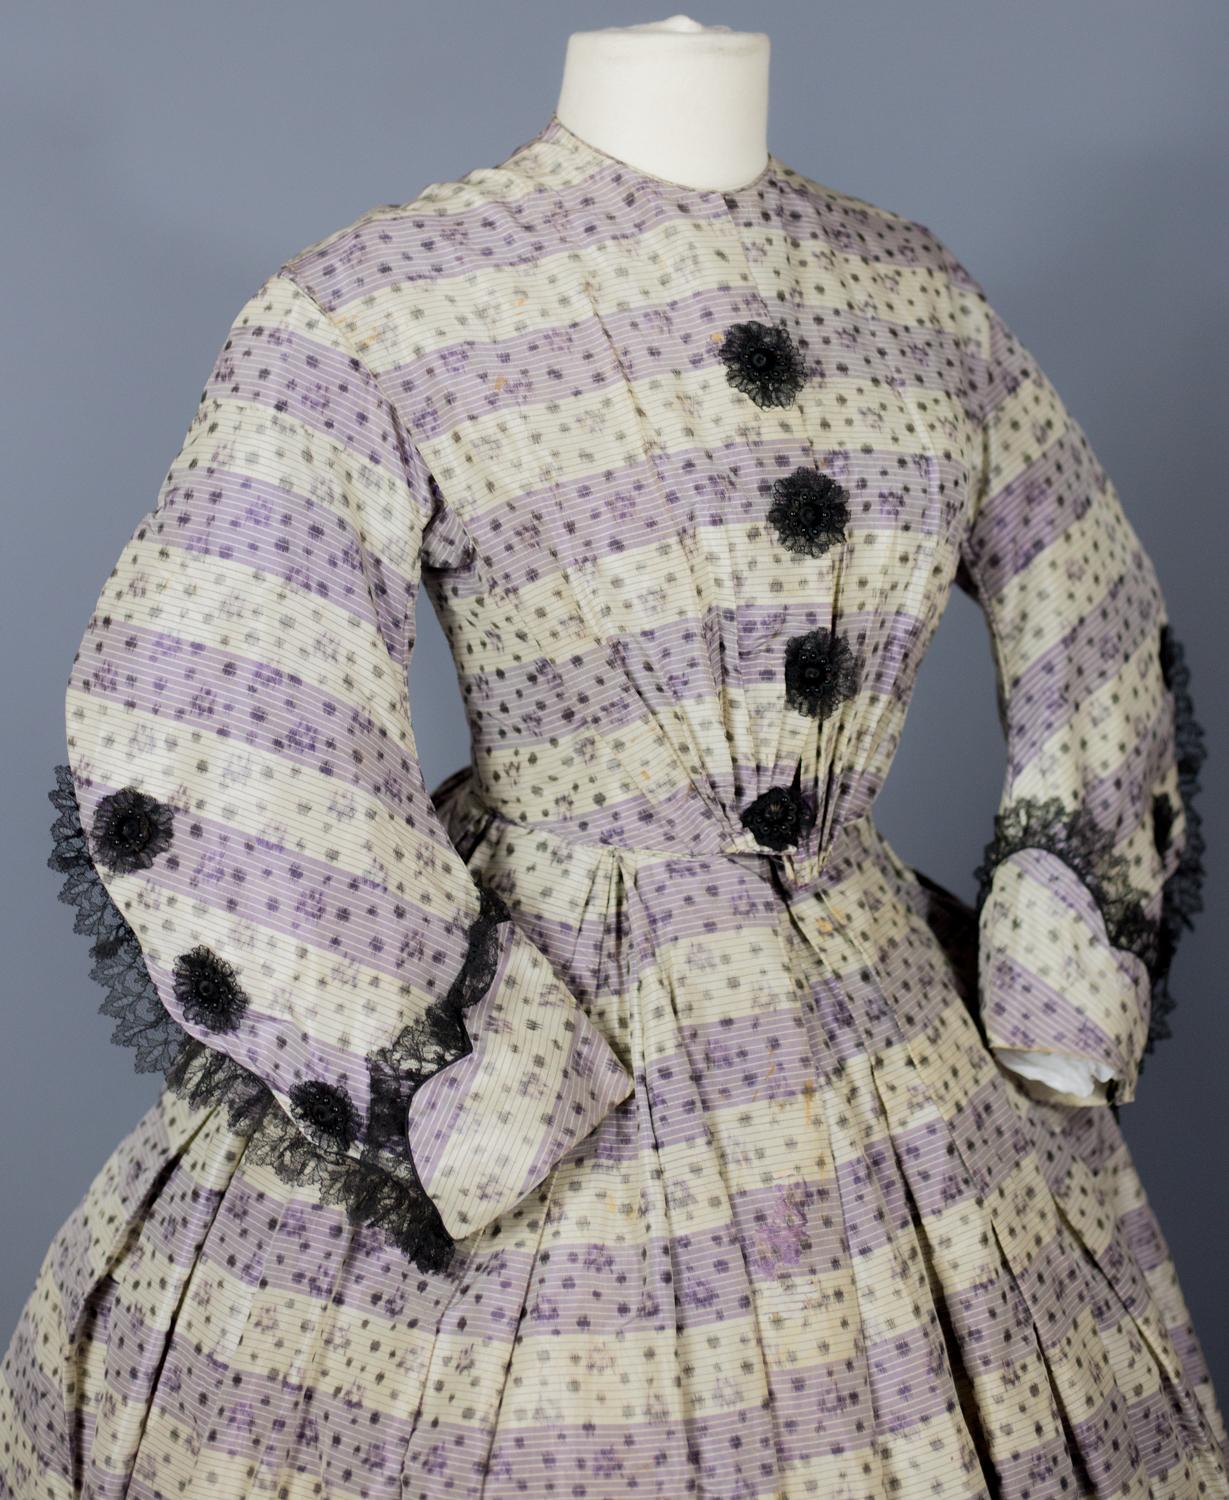 Circa 1855/1858
France or Europe
 
Beautiful day dress with large crinoline dating from the beginning of the Second Empire period. Cream silk taffeta with purple stripes, speckled in leopard-style Chiné silk, inspired by Louis XVI French